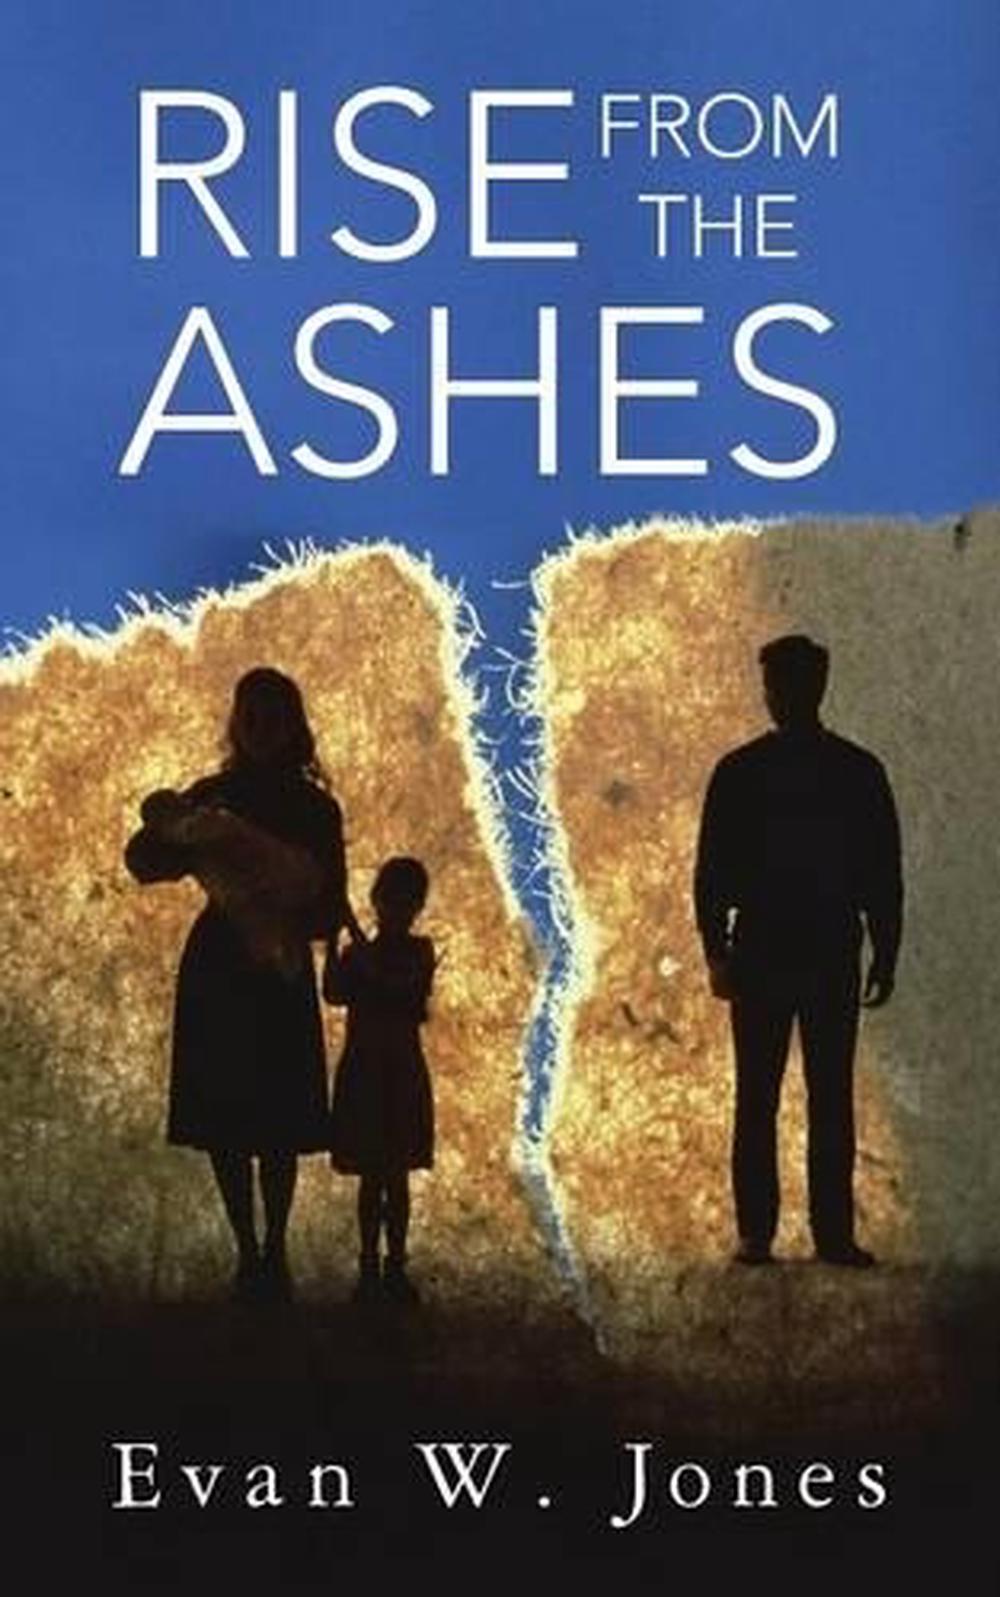 rise-from-the-ashes-by-evan-w-jones-english-paperback-book-free-shipping-9781491819685-ebay